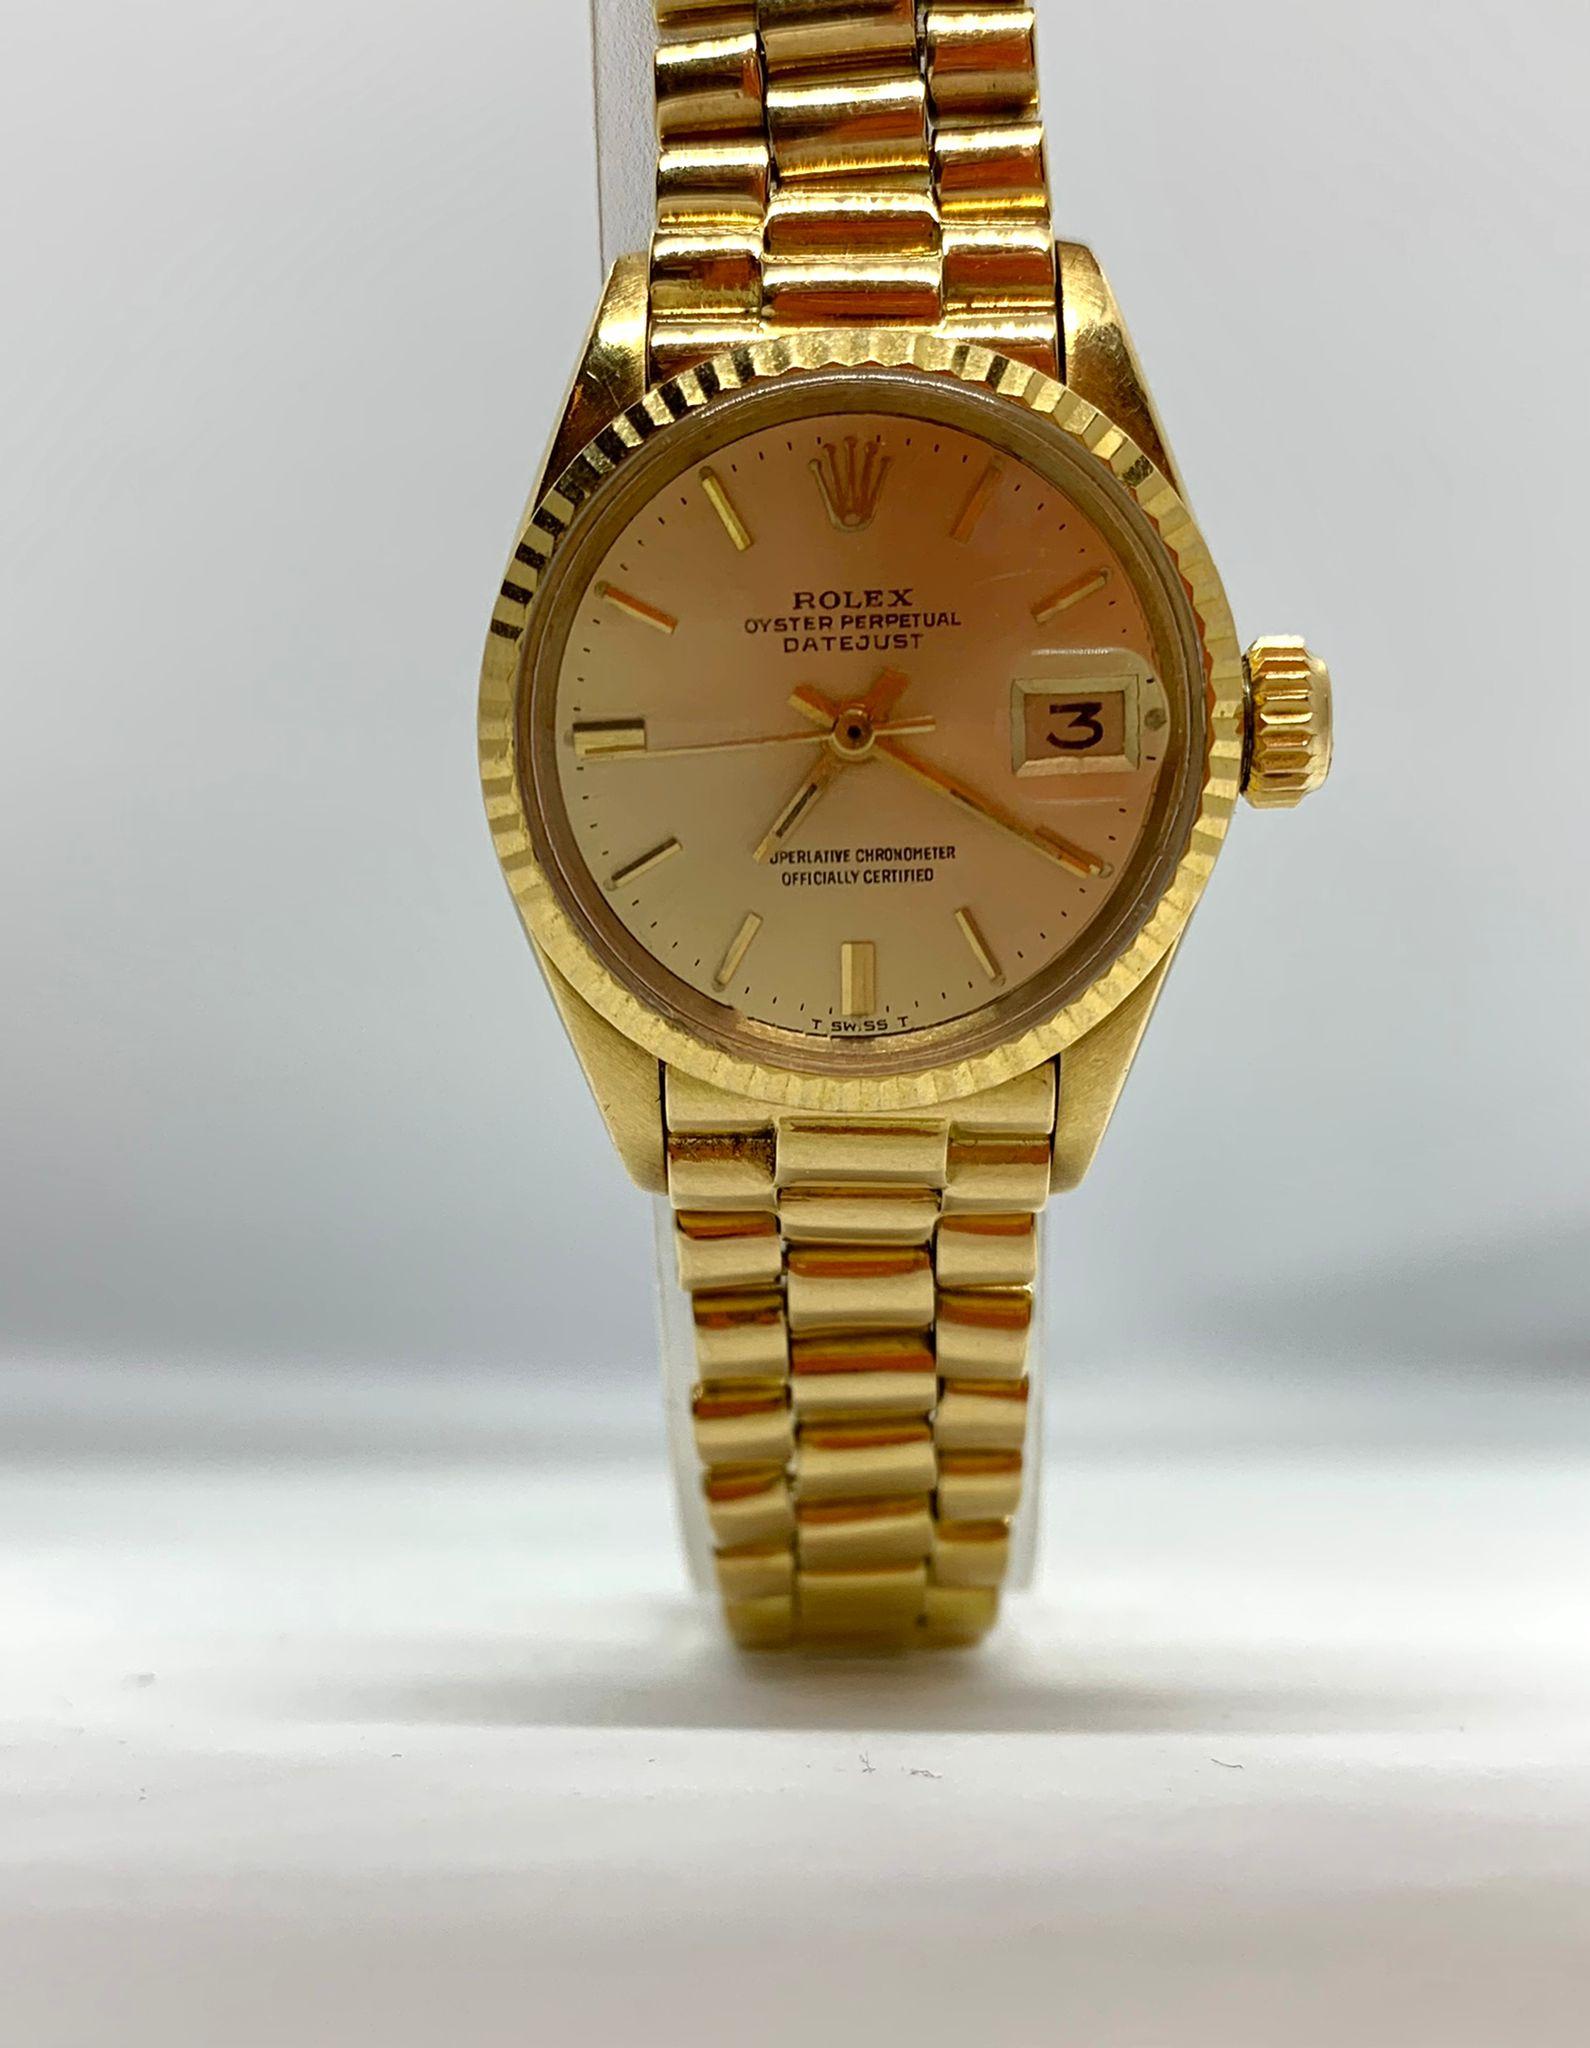 Spanish Oyster Perpetual Datejust Gold Watch, Jewelry, 70s For Sale